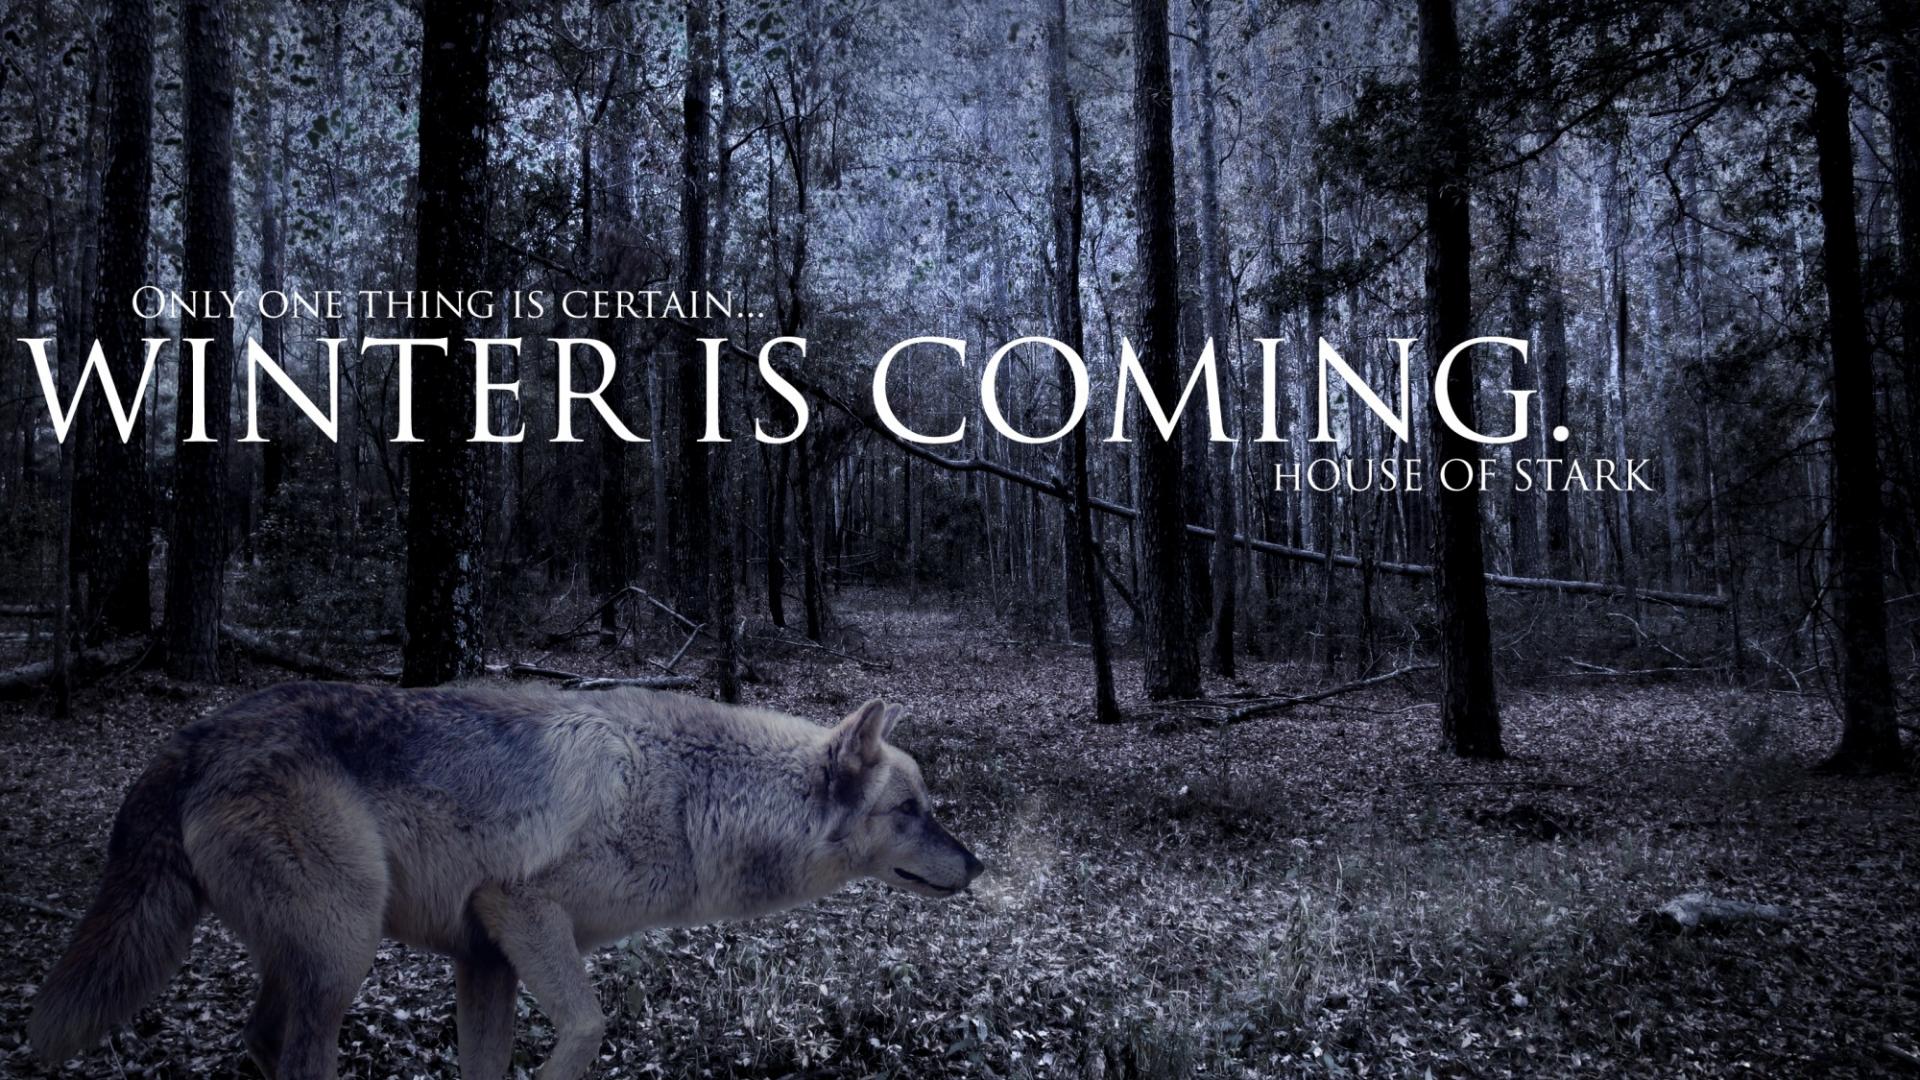 Best 10 GAME OF THRONES WALLPAPER WINTER IS COMING Pictures